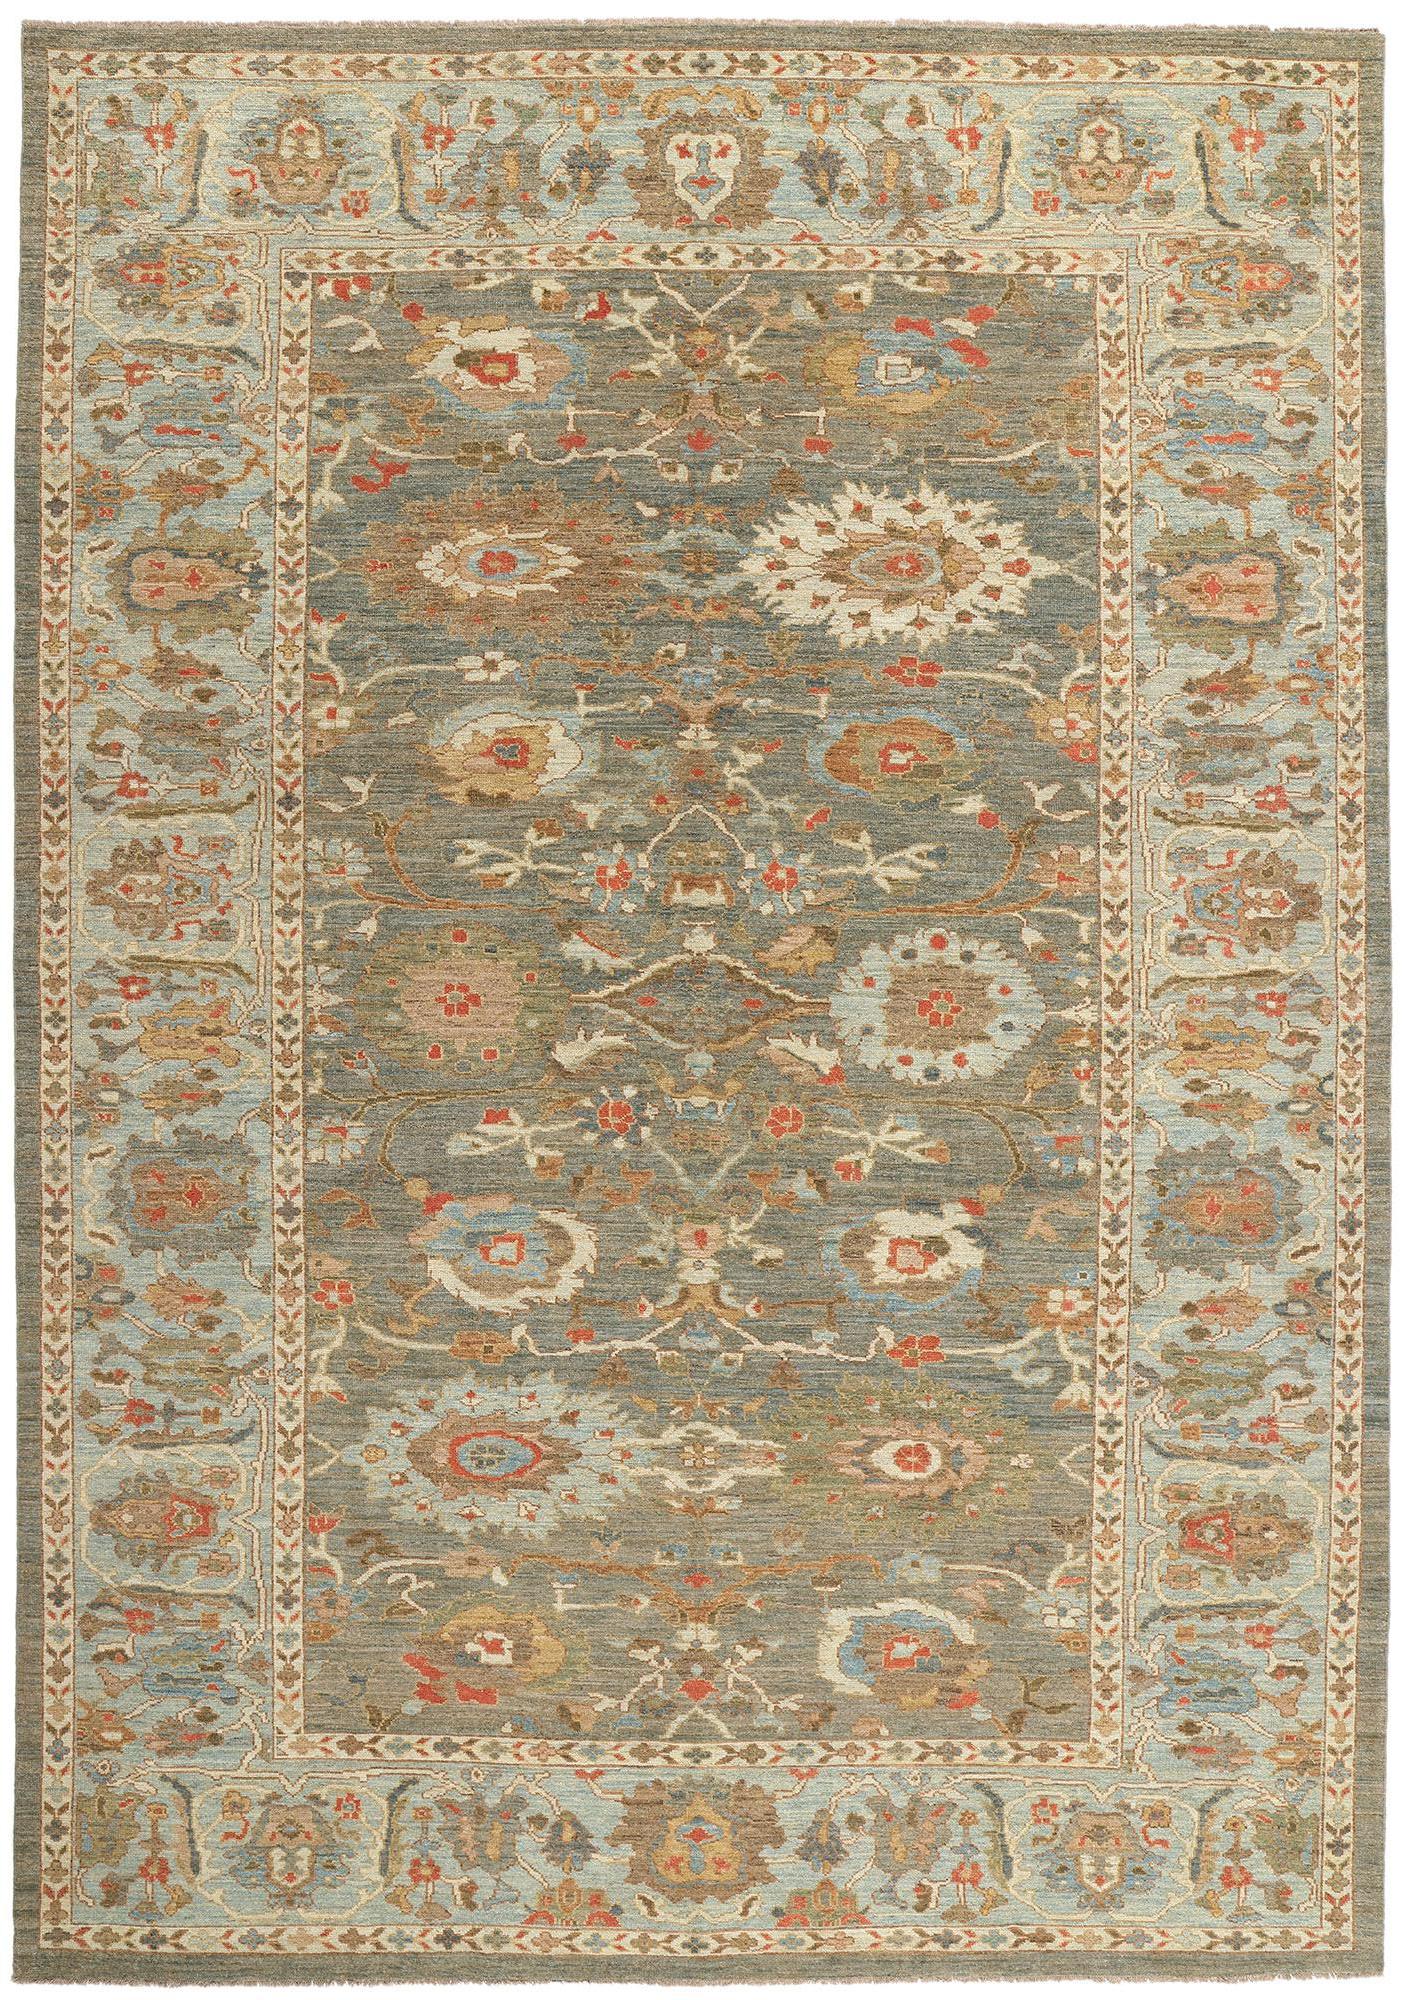 Contemporary Blue and Gray Persian Sultanabad Rug